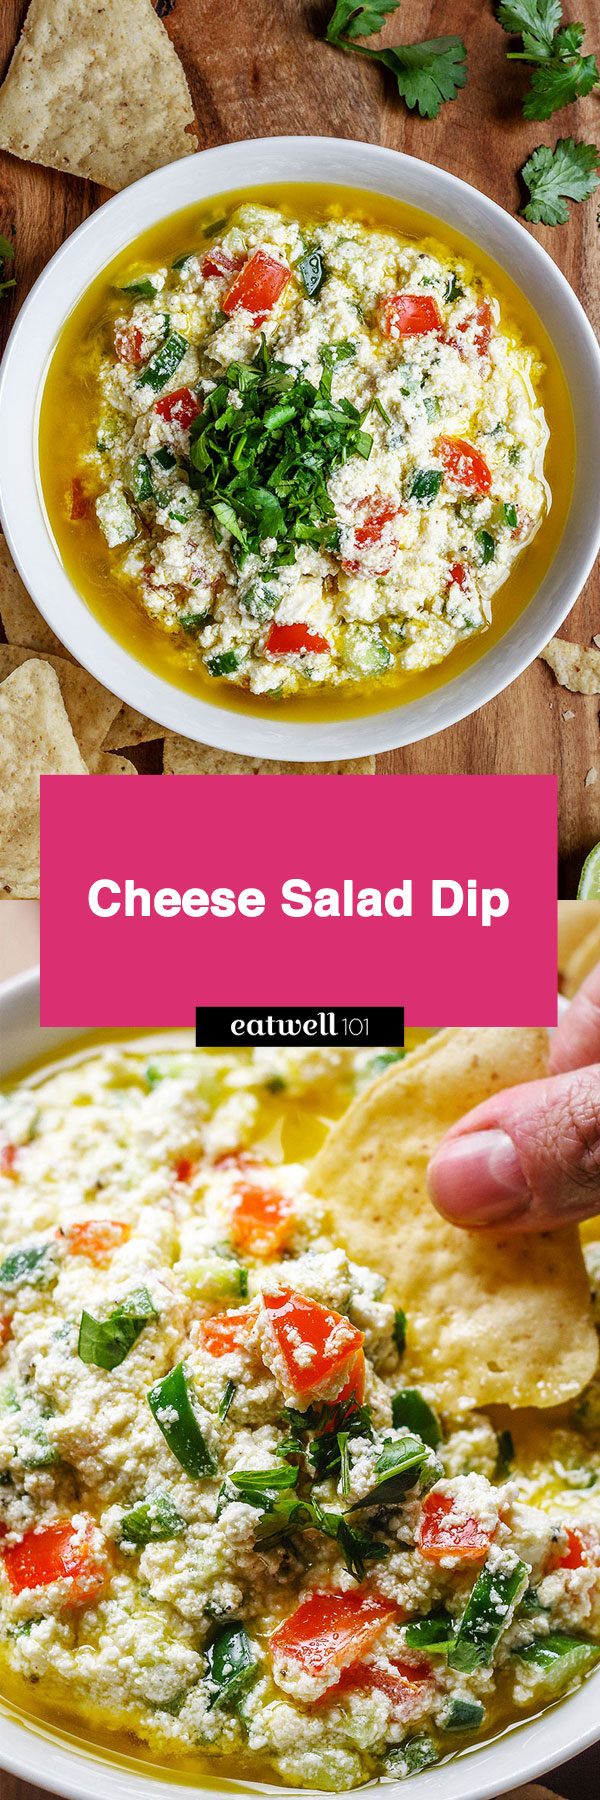 Cheese salad dip - Quick and easy to make, and tastes SO fresh and delicious!